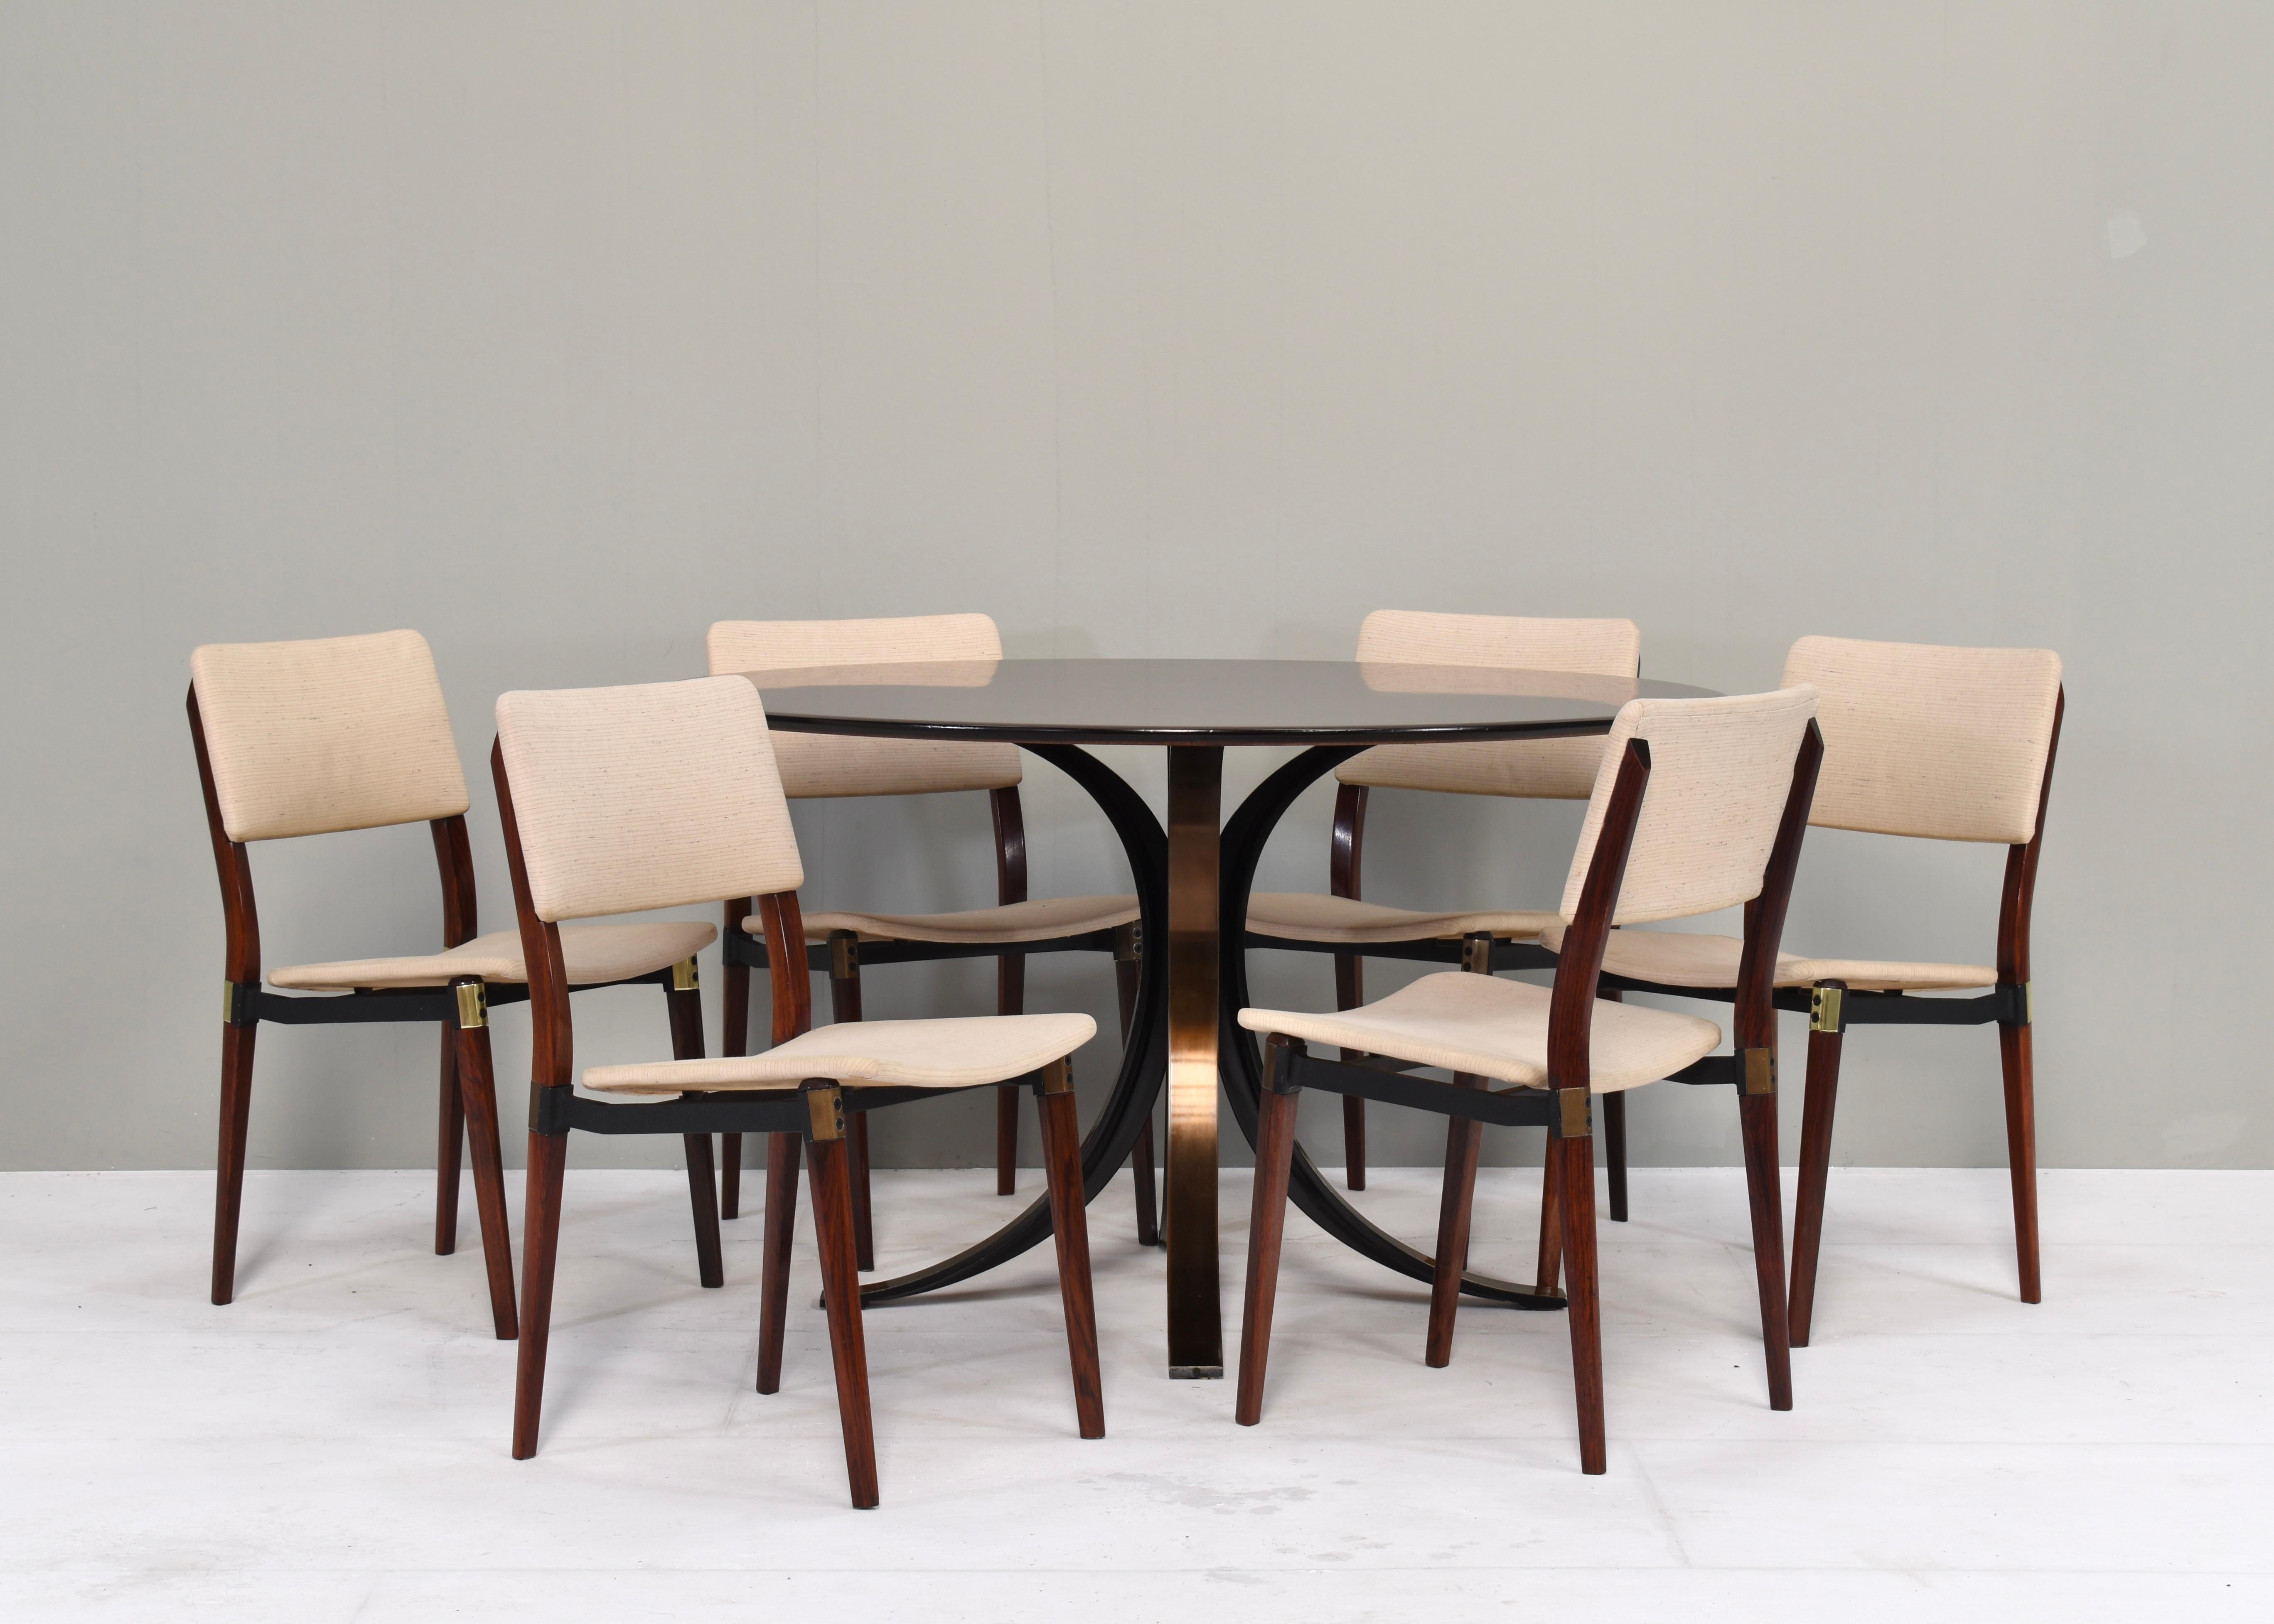 Iconic dining table and six dining chairs by Osvaldo Borsani and Eugenio Gerli for TECNO, Italy, circa 1960. Four chairs have galvanized metal details and two chairs have brass details.
Designer: Osvaldo Borsani & Eugenio Gerli.
Country: